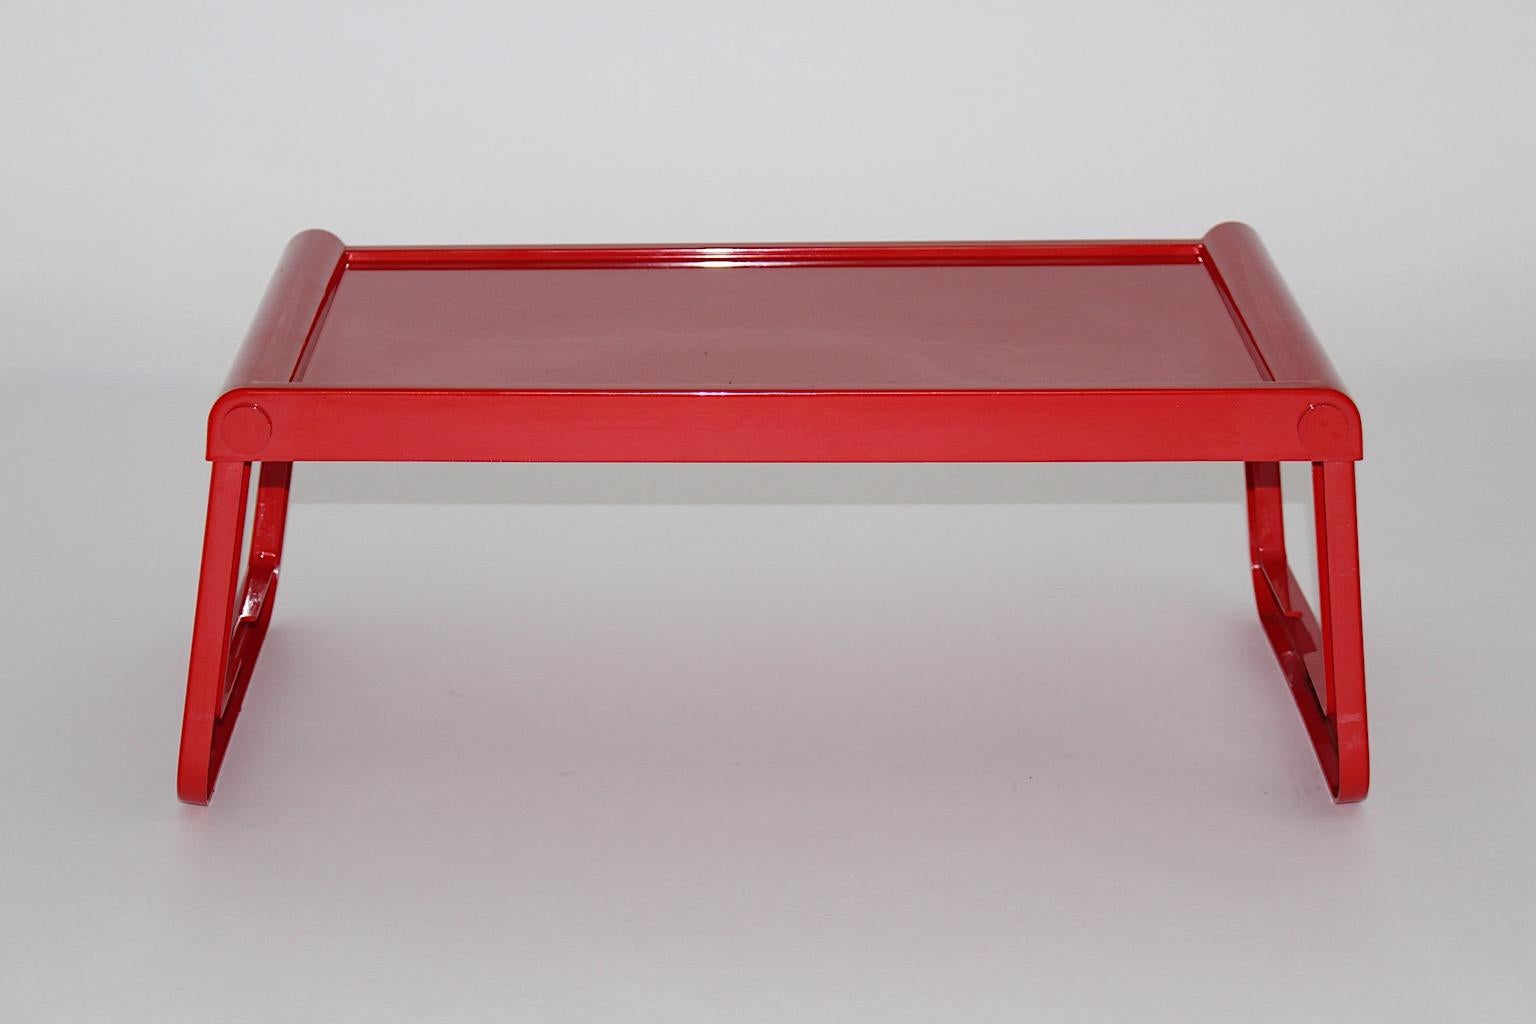 Soace Age red vintage tray table, gueridon or serving table model Pepito from plastic by Luigi Massoni for Guzzin 1970s Italy.
A bold colored practical vintage tray table with foldable base reflects the color and the material from this era.
This